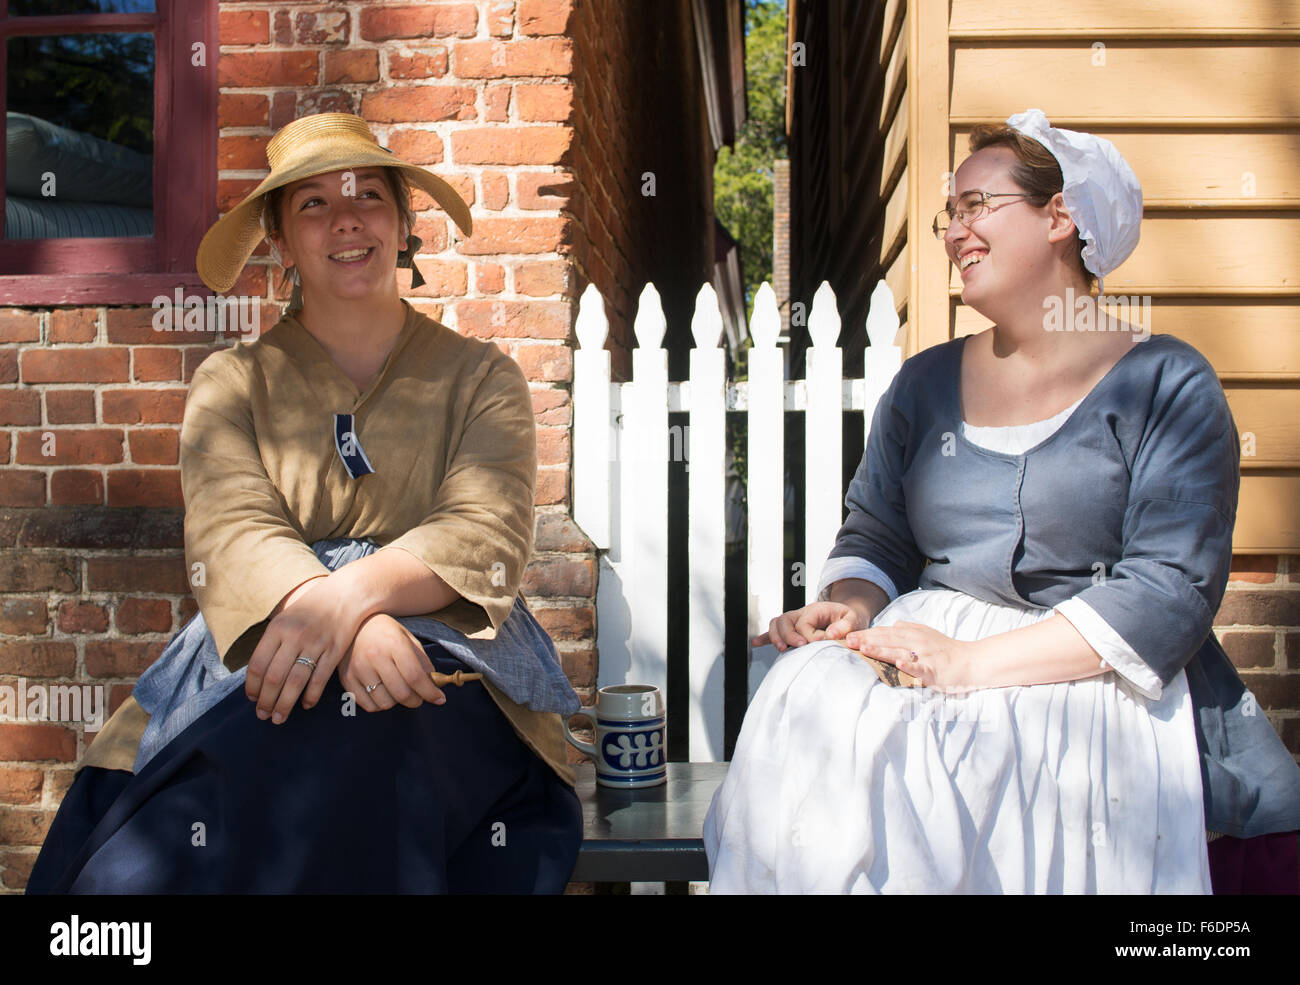 Two young smiling women in period costume at Colonial Williamsburg, Virginia, USA Stock Photo